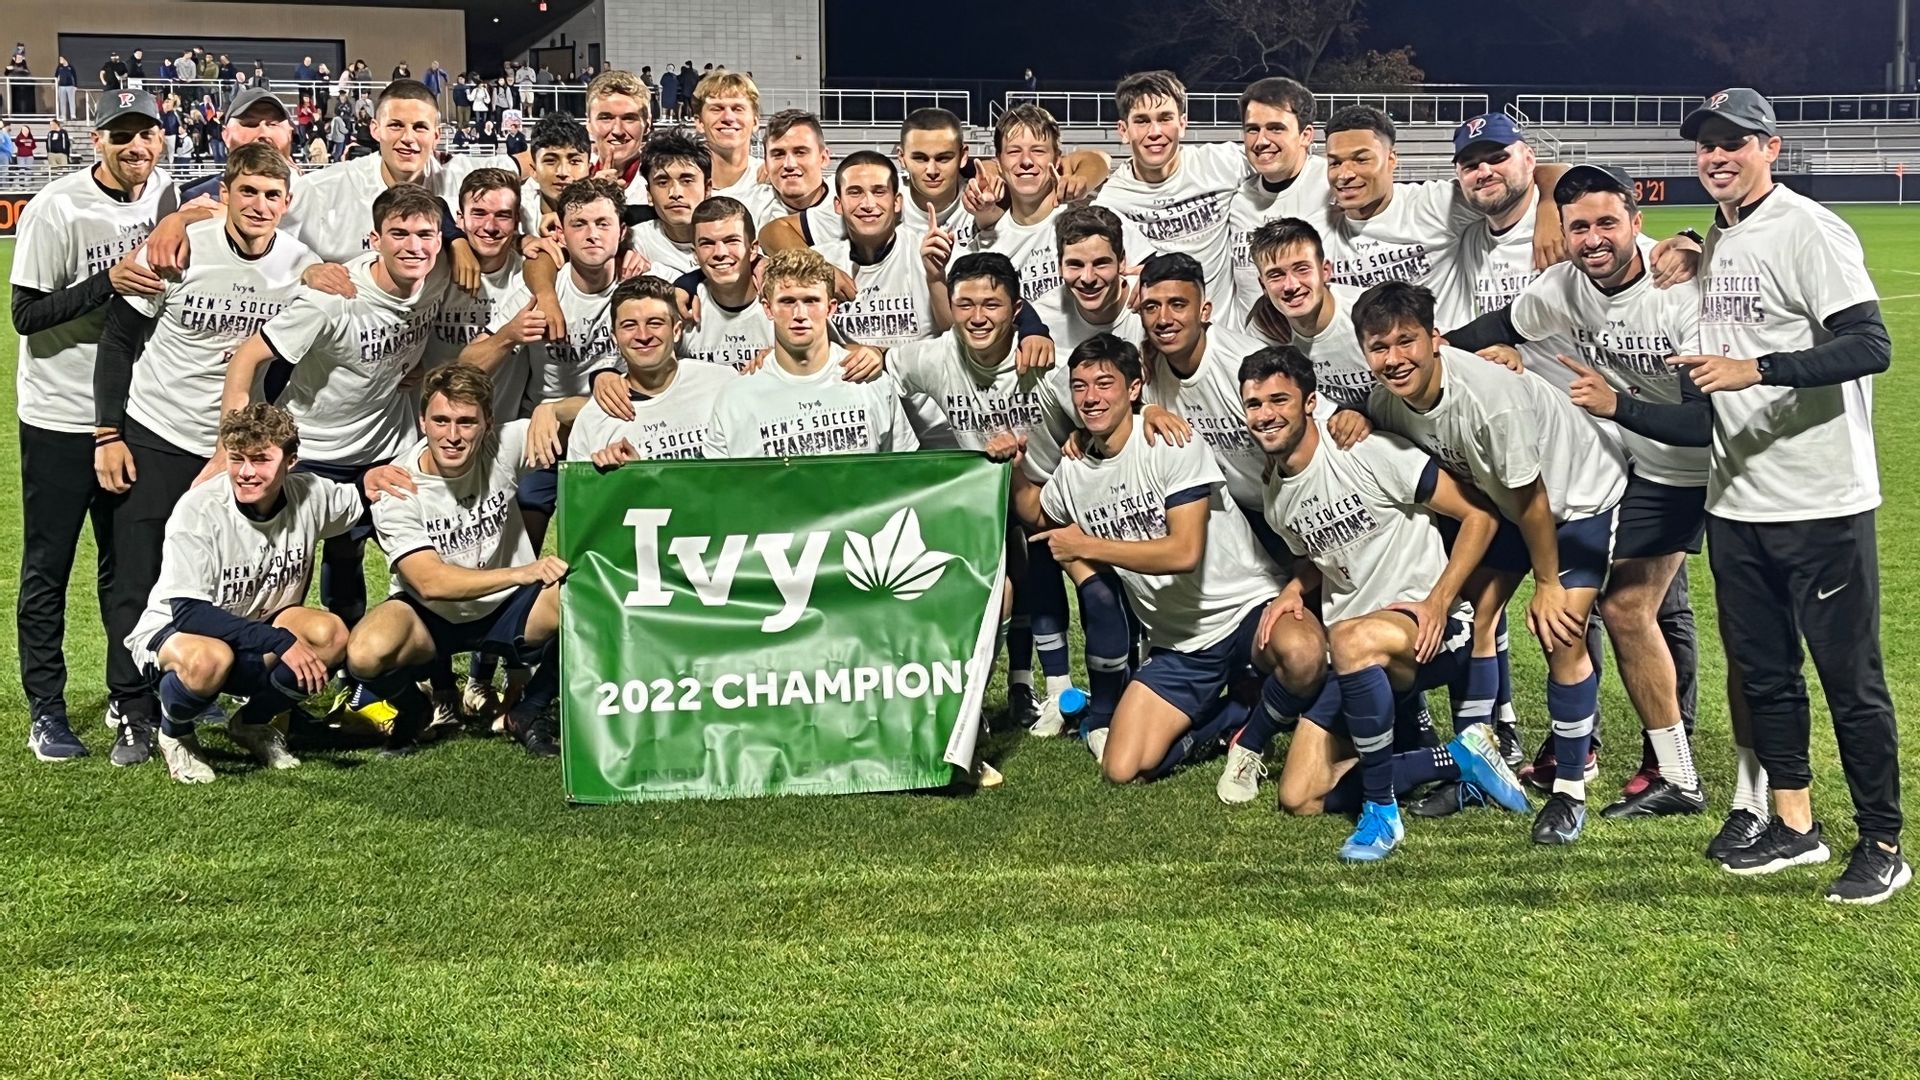 The men's soccer team poses with the 2022 Ivy champion banner.